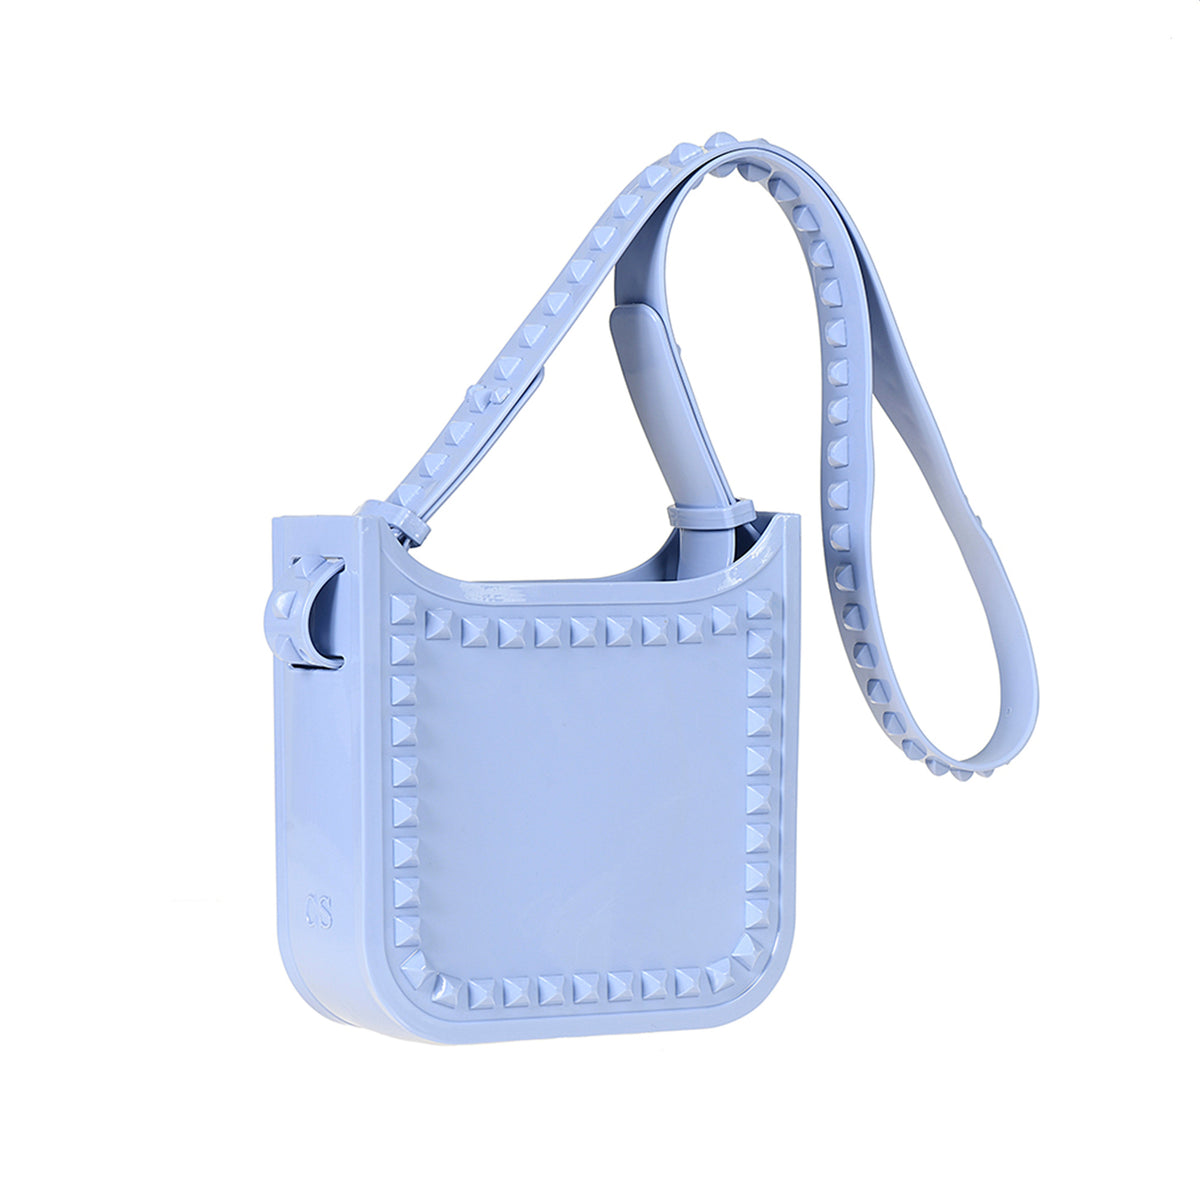 Small Lisa crossbody beach bags for women in color baby blue on sale